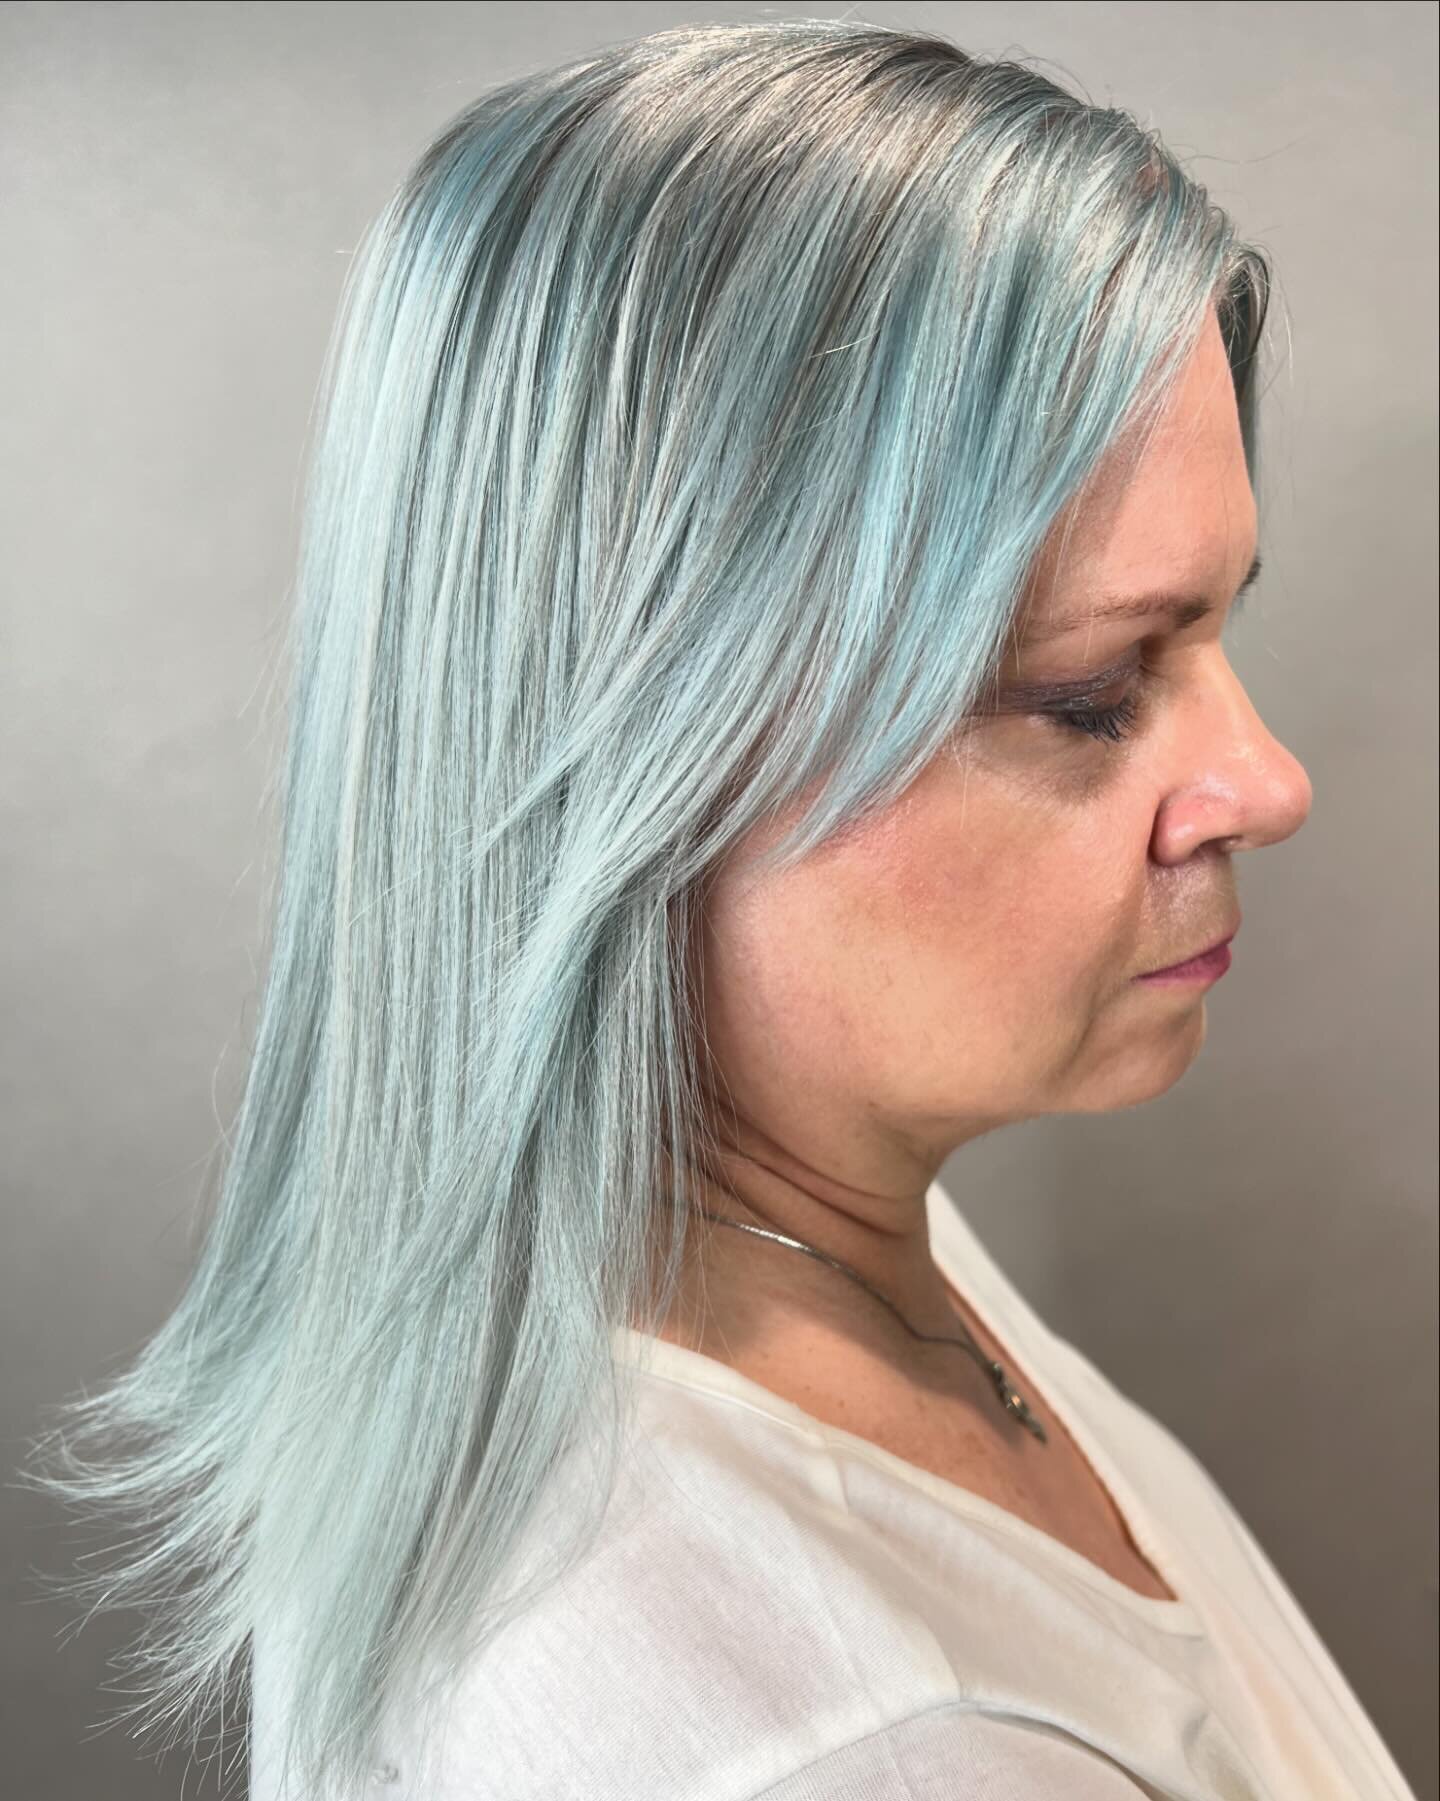 Lets talk! This client wanted to add some dimension added to her hair because most of her grey hairs have gone white. However, she doesn&rsquo;t want to lighten or use any permanent (or demi-permanent) color on her hair. So we attempted to put some l